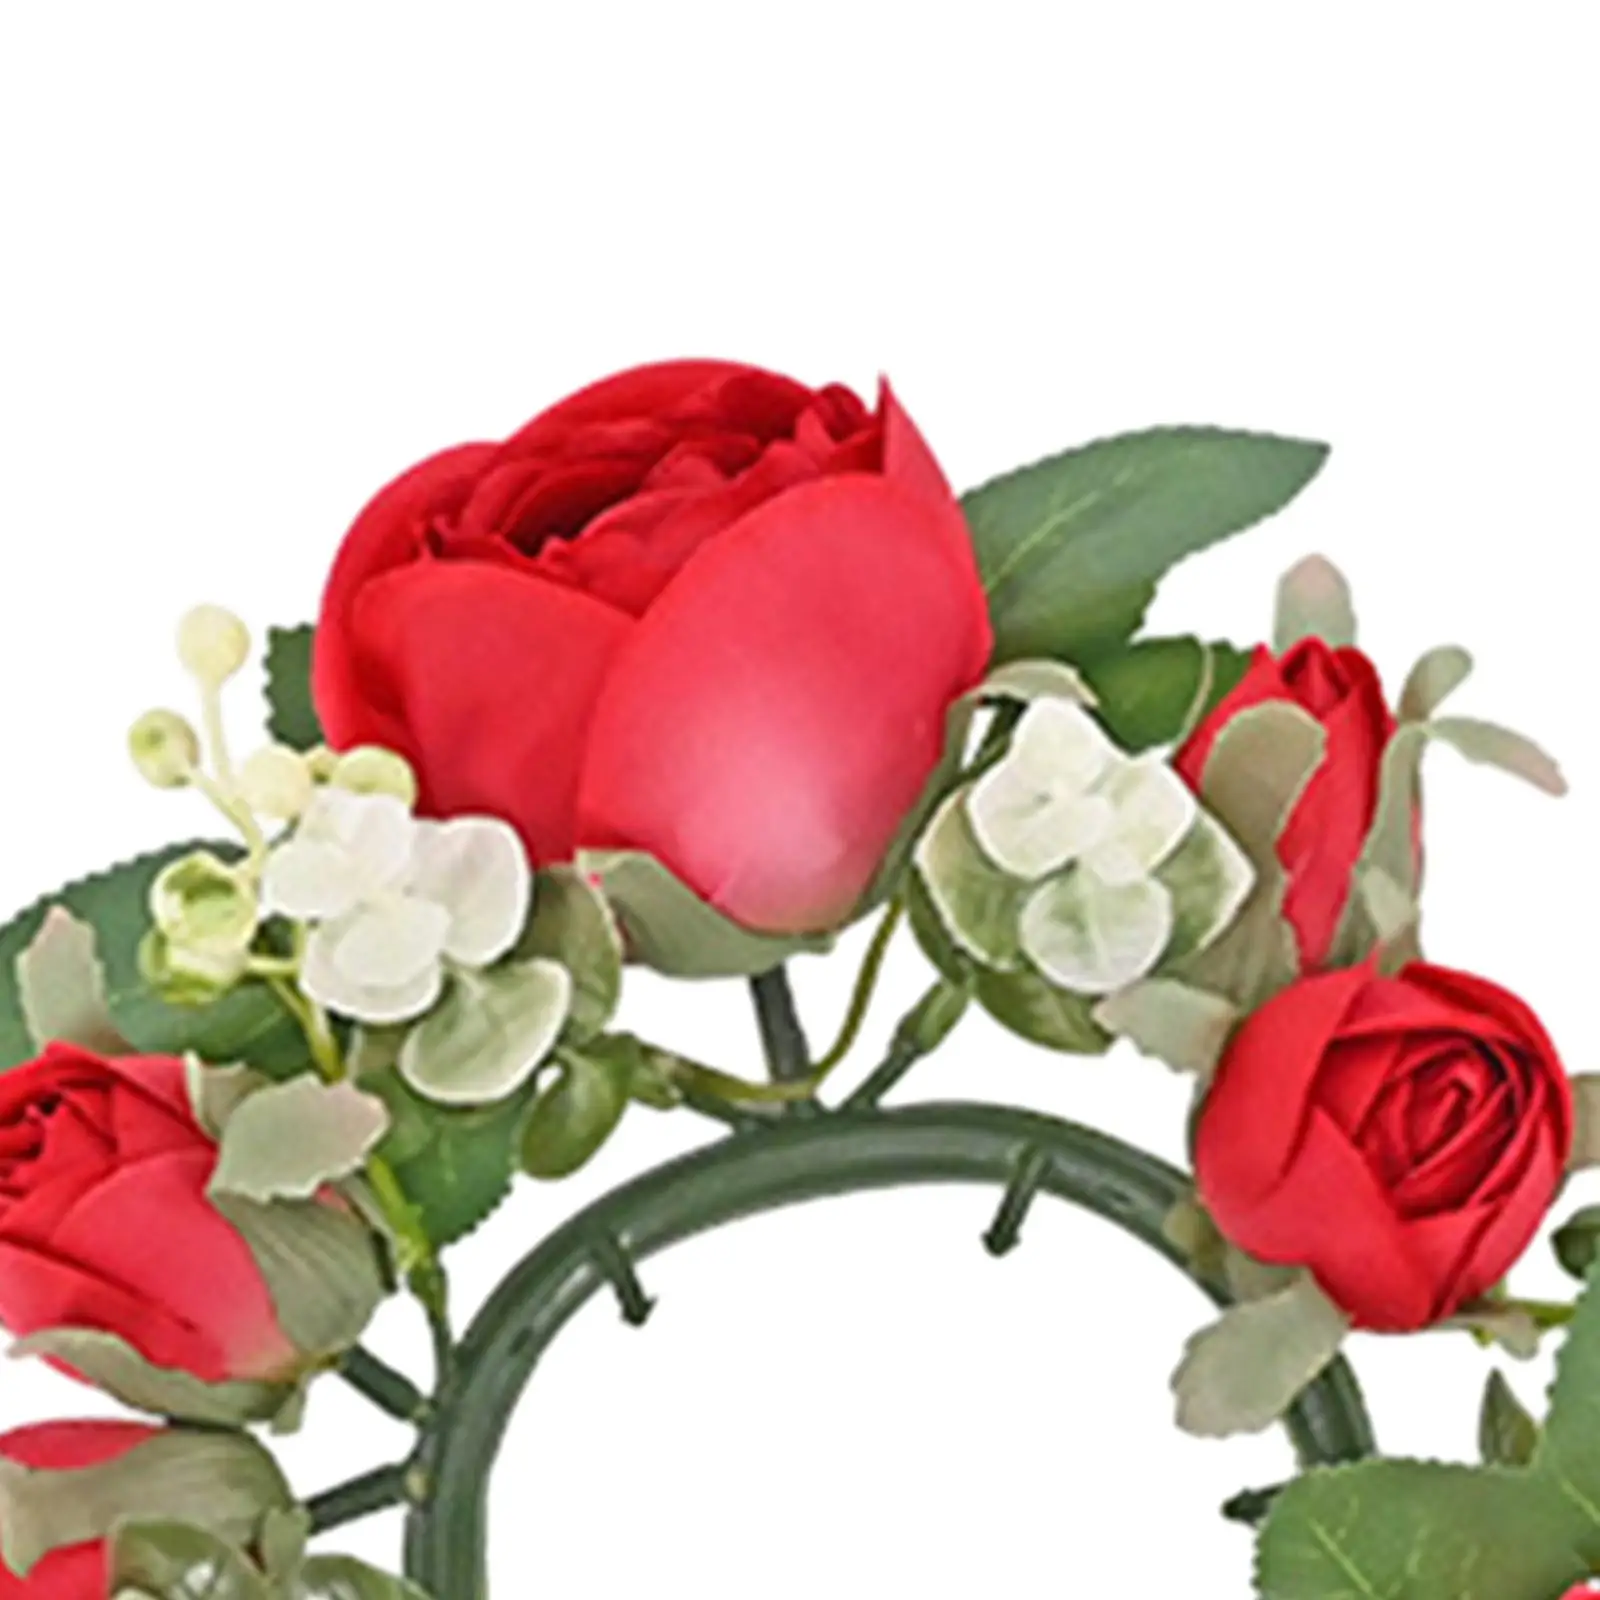 Candle Ring Artificial Wreath Floral Arrangement Greenery Rose Wreath Candle Ring for Living Room Home Door Table Easter